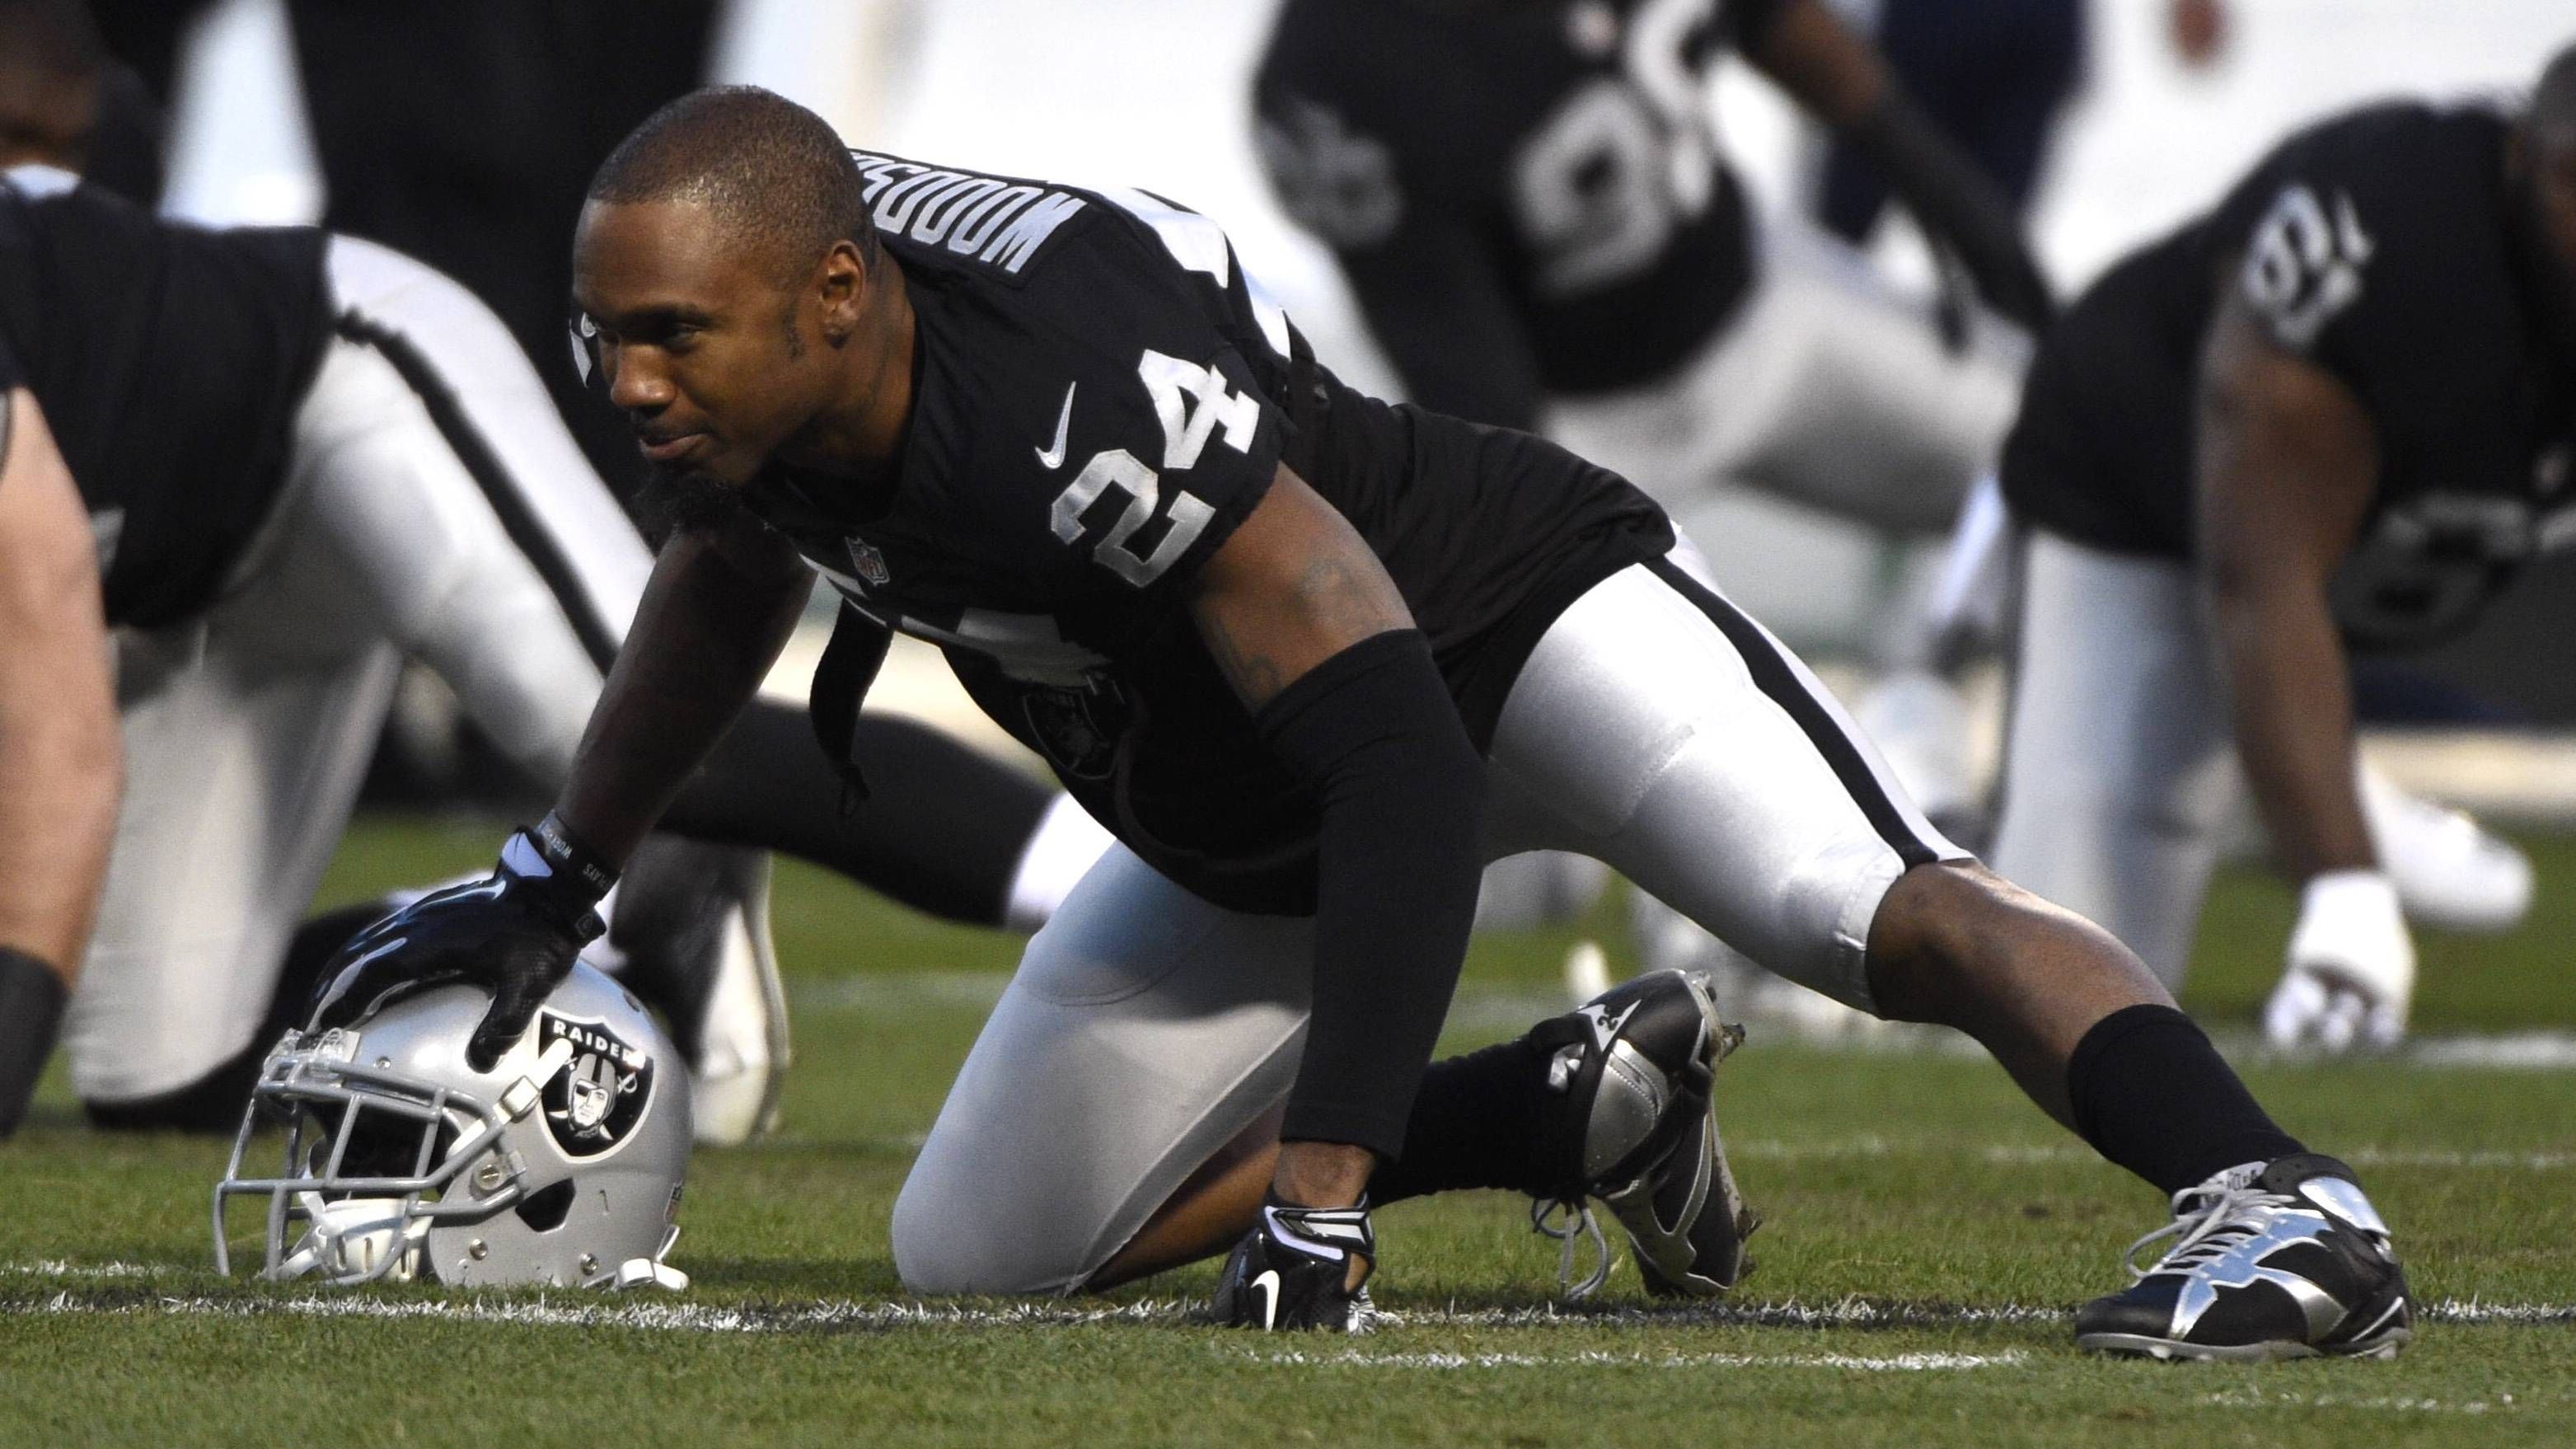 <strong>24: Charles Woodson</strong><br>Teams: Oakland Raiders, Green Bay Packers<br> Position: Cornerback, Safety<br>Erfolge: Super-Bowl-Champion 2011, neunmaliger Pro Bowler, 1998 NFL Defensive Rookie of the Year, 2009 NFL Defensive Player of the Year<br>Honorable Mentions: Darrelle Revis, Champ Bailey, Marshawn Lynch, Ty Law